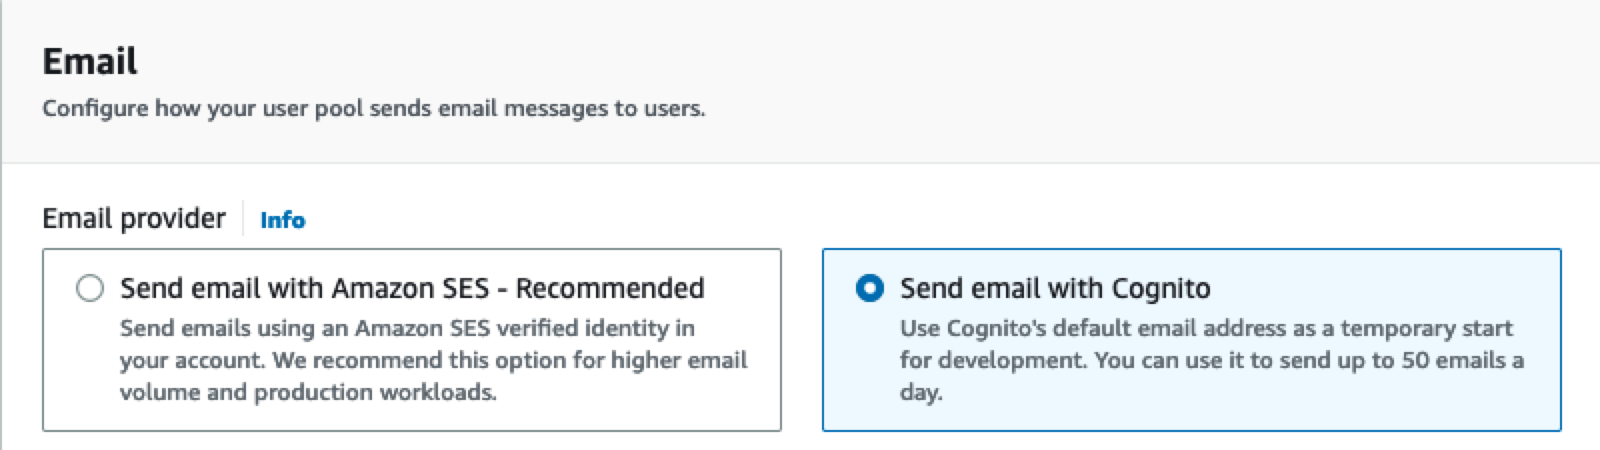 Configuring emails to be sent via Cognito instead of the default Simple Email Service.